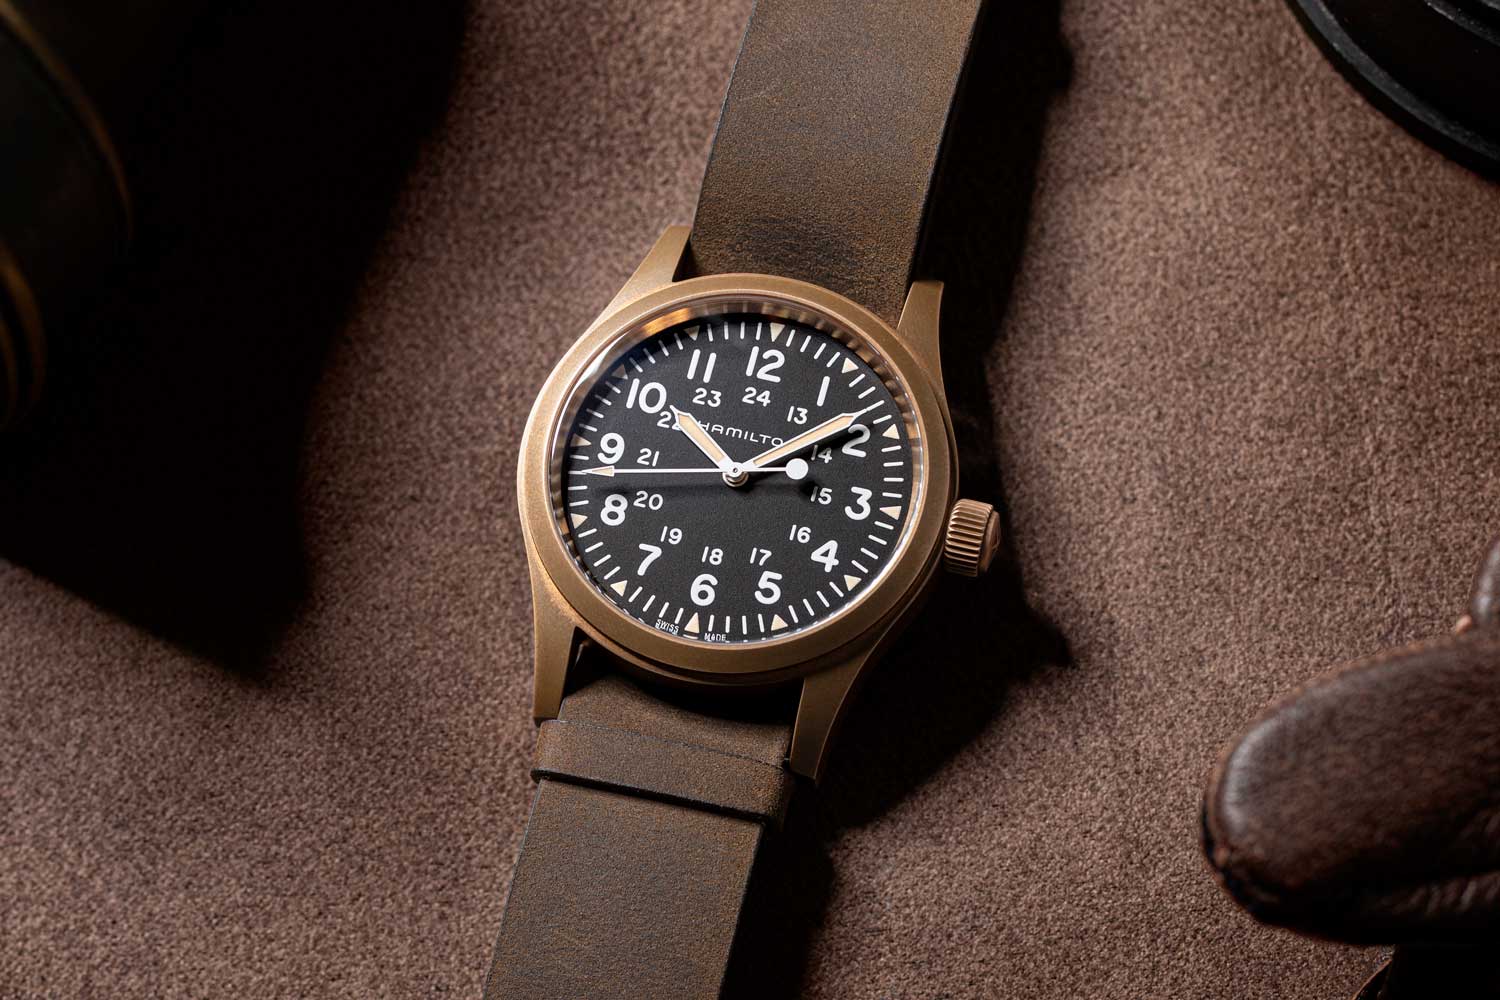 The Hamilton Khaki Field Mechanical 38mm collection is a direct descendant of the military watches of the 1960s, albeit with some welcome modern twists. (©Revolution)